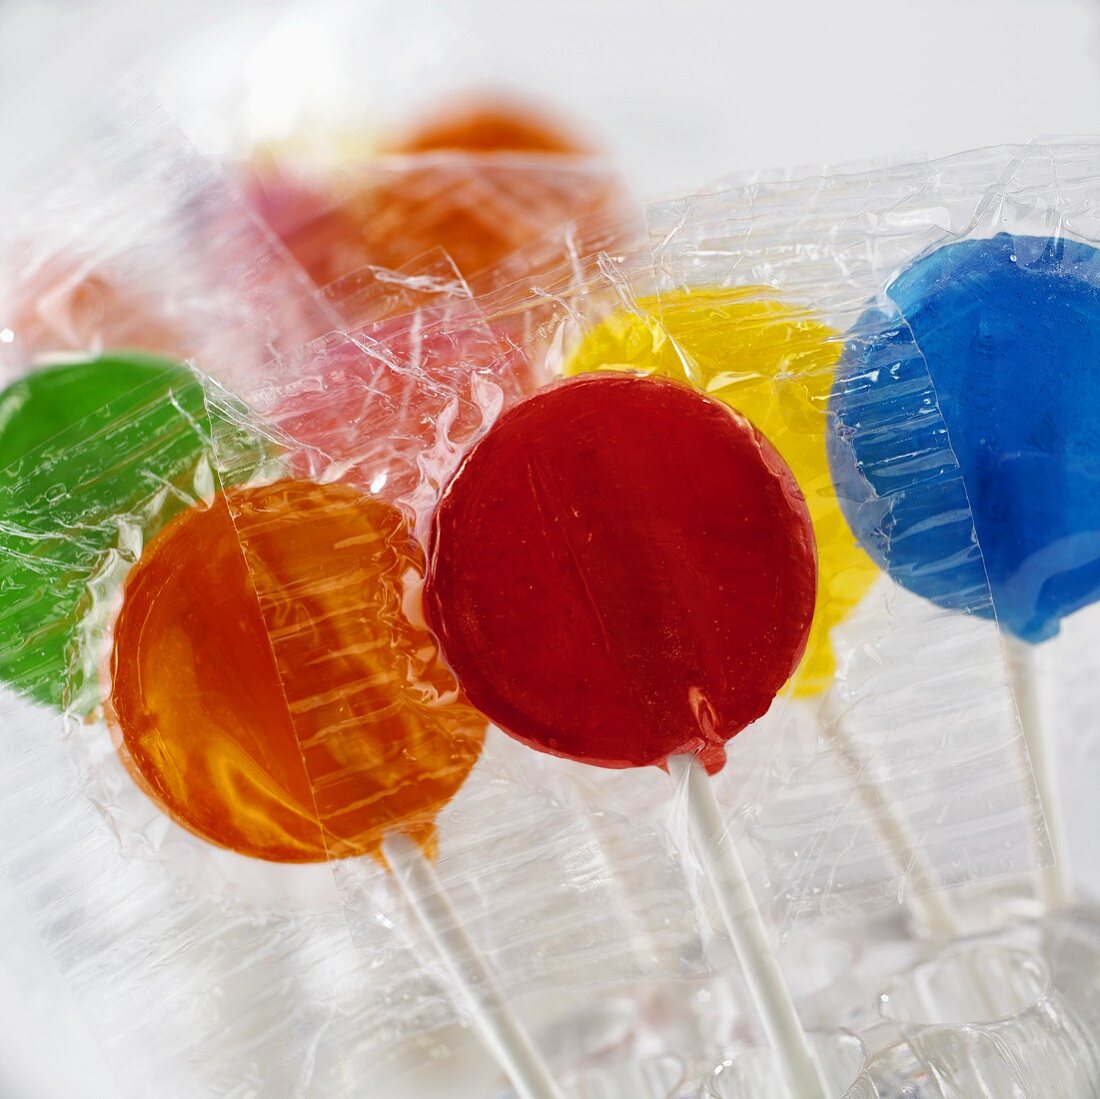 Coloured lollipops in cellophane wrappers